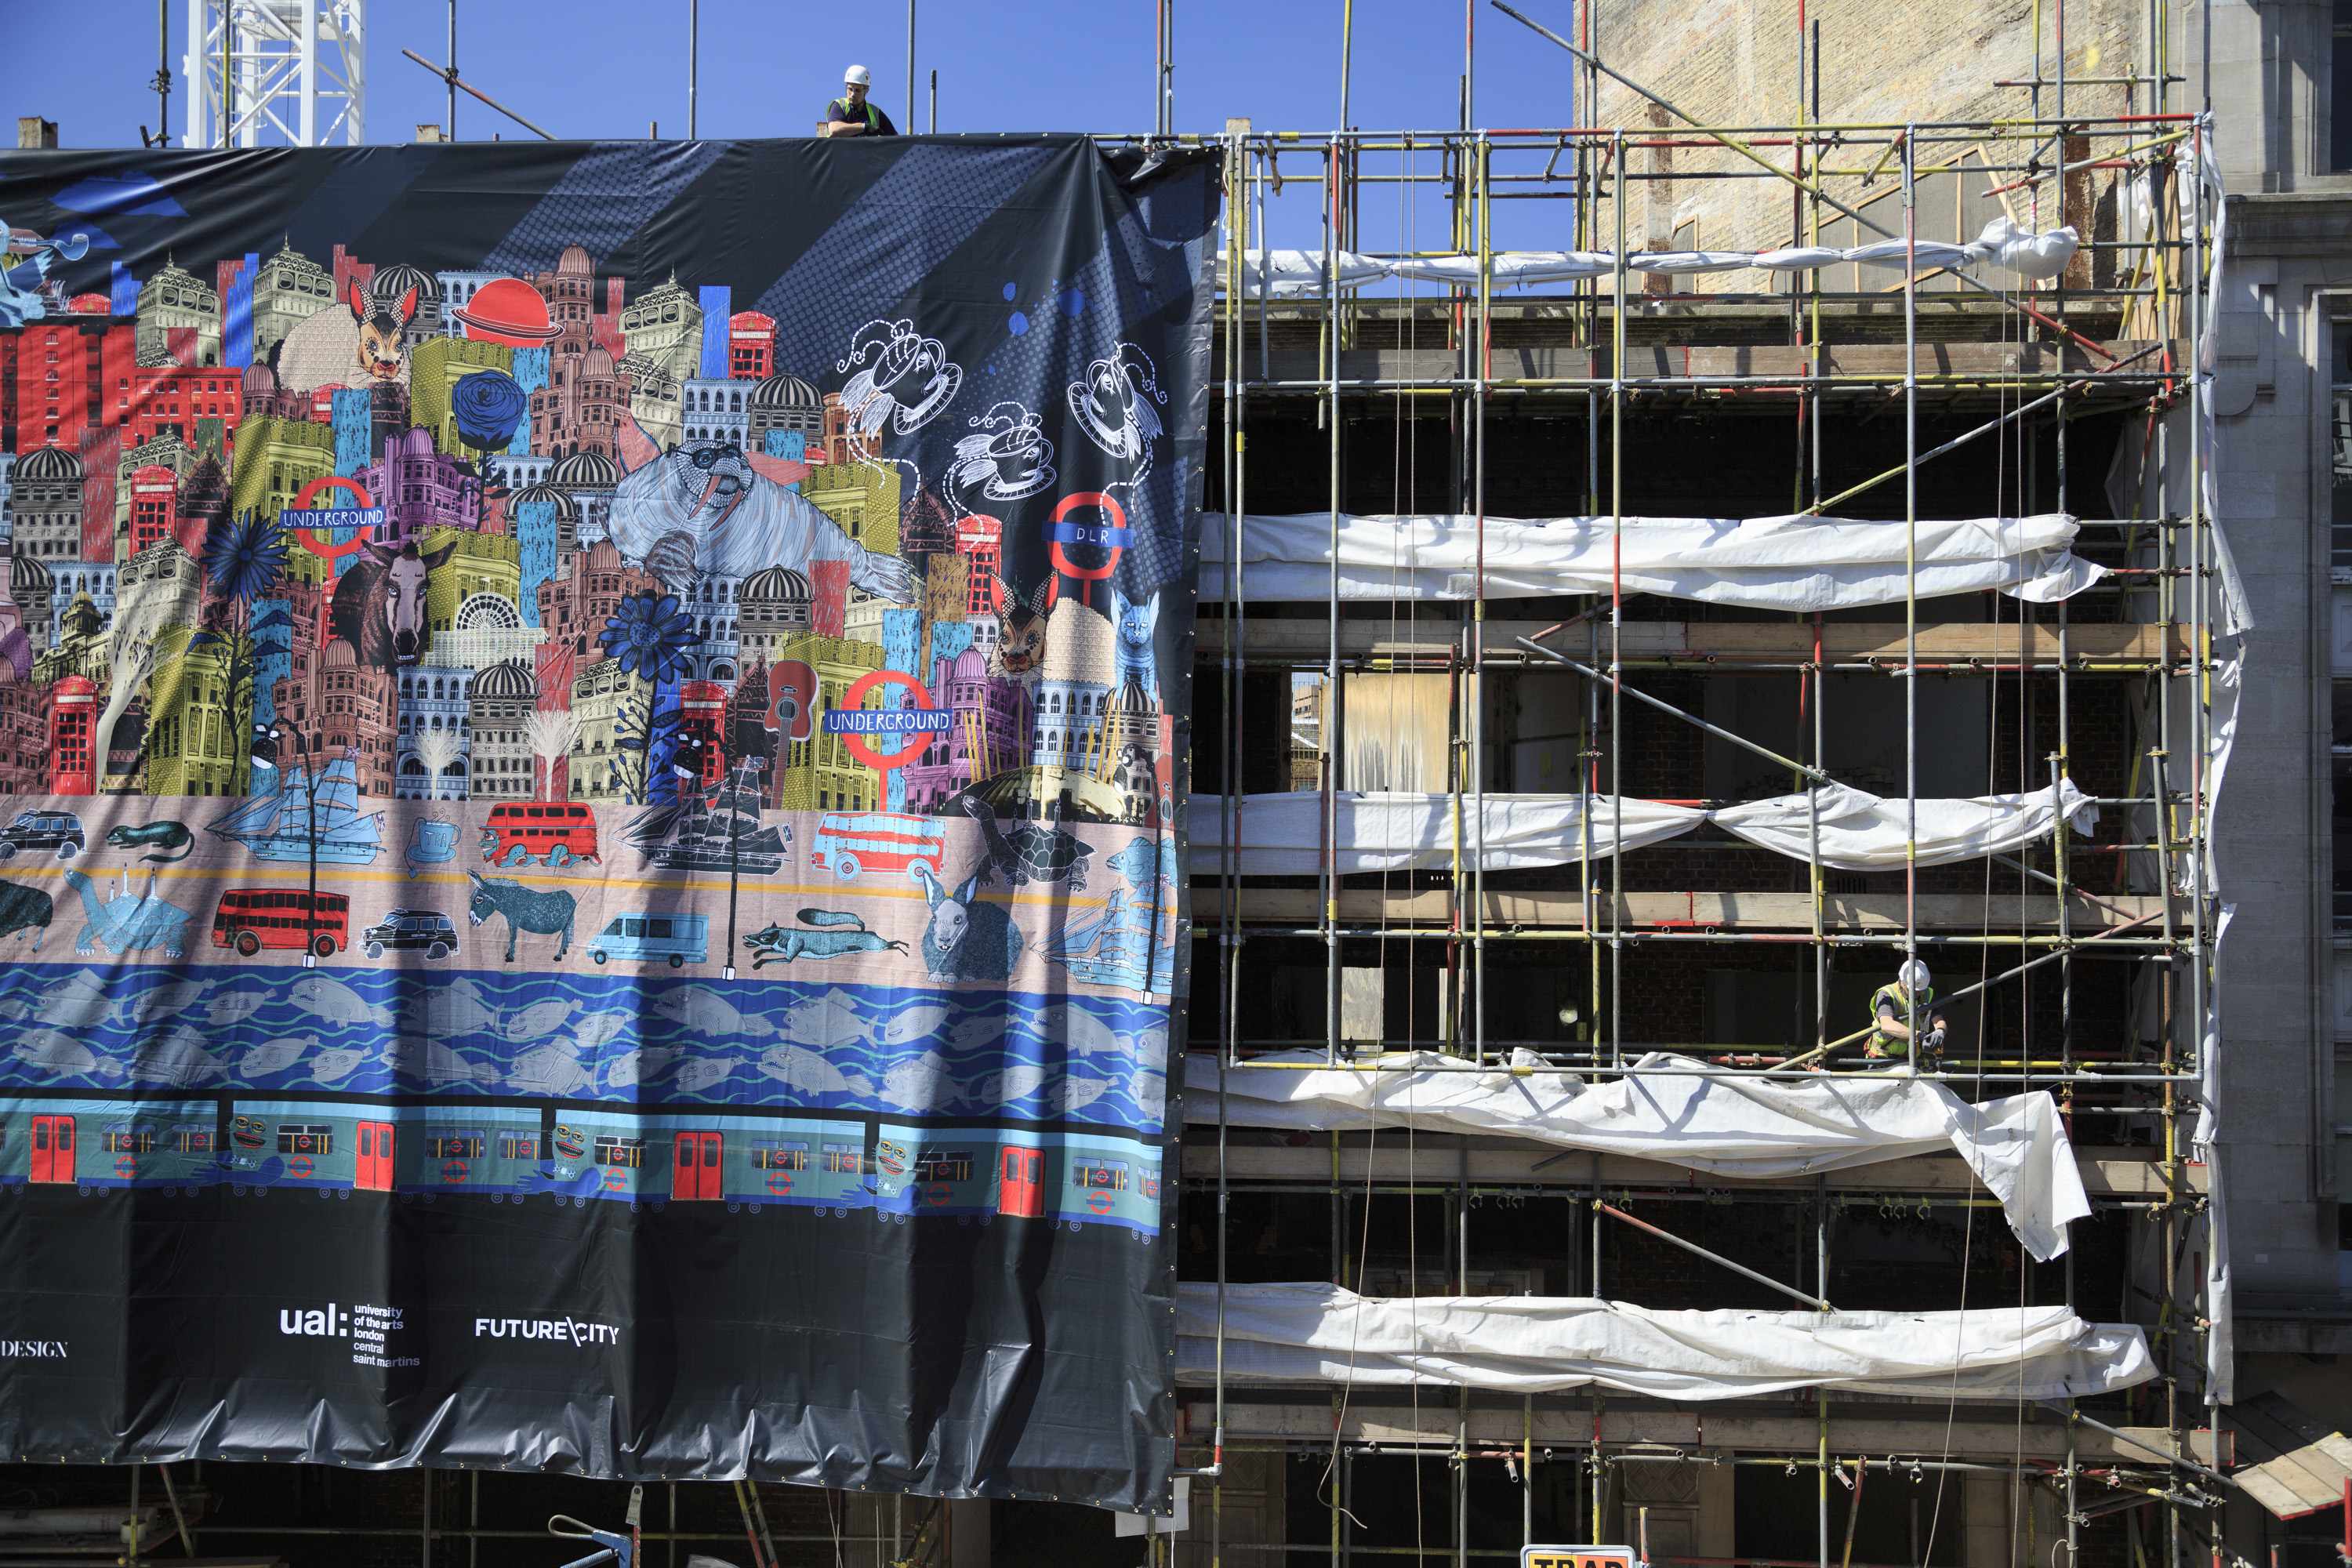 Old Central St. Martins Wrapped Ahead of Re-Development Scheme For Foyles